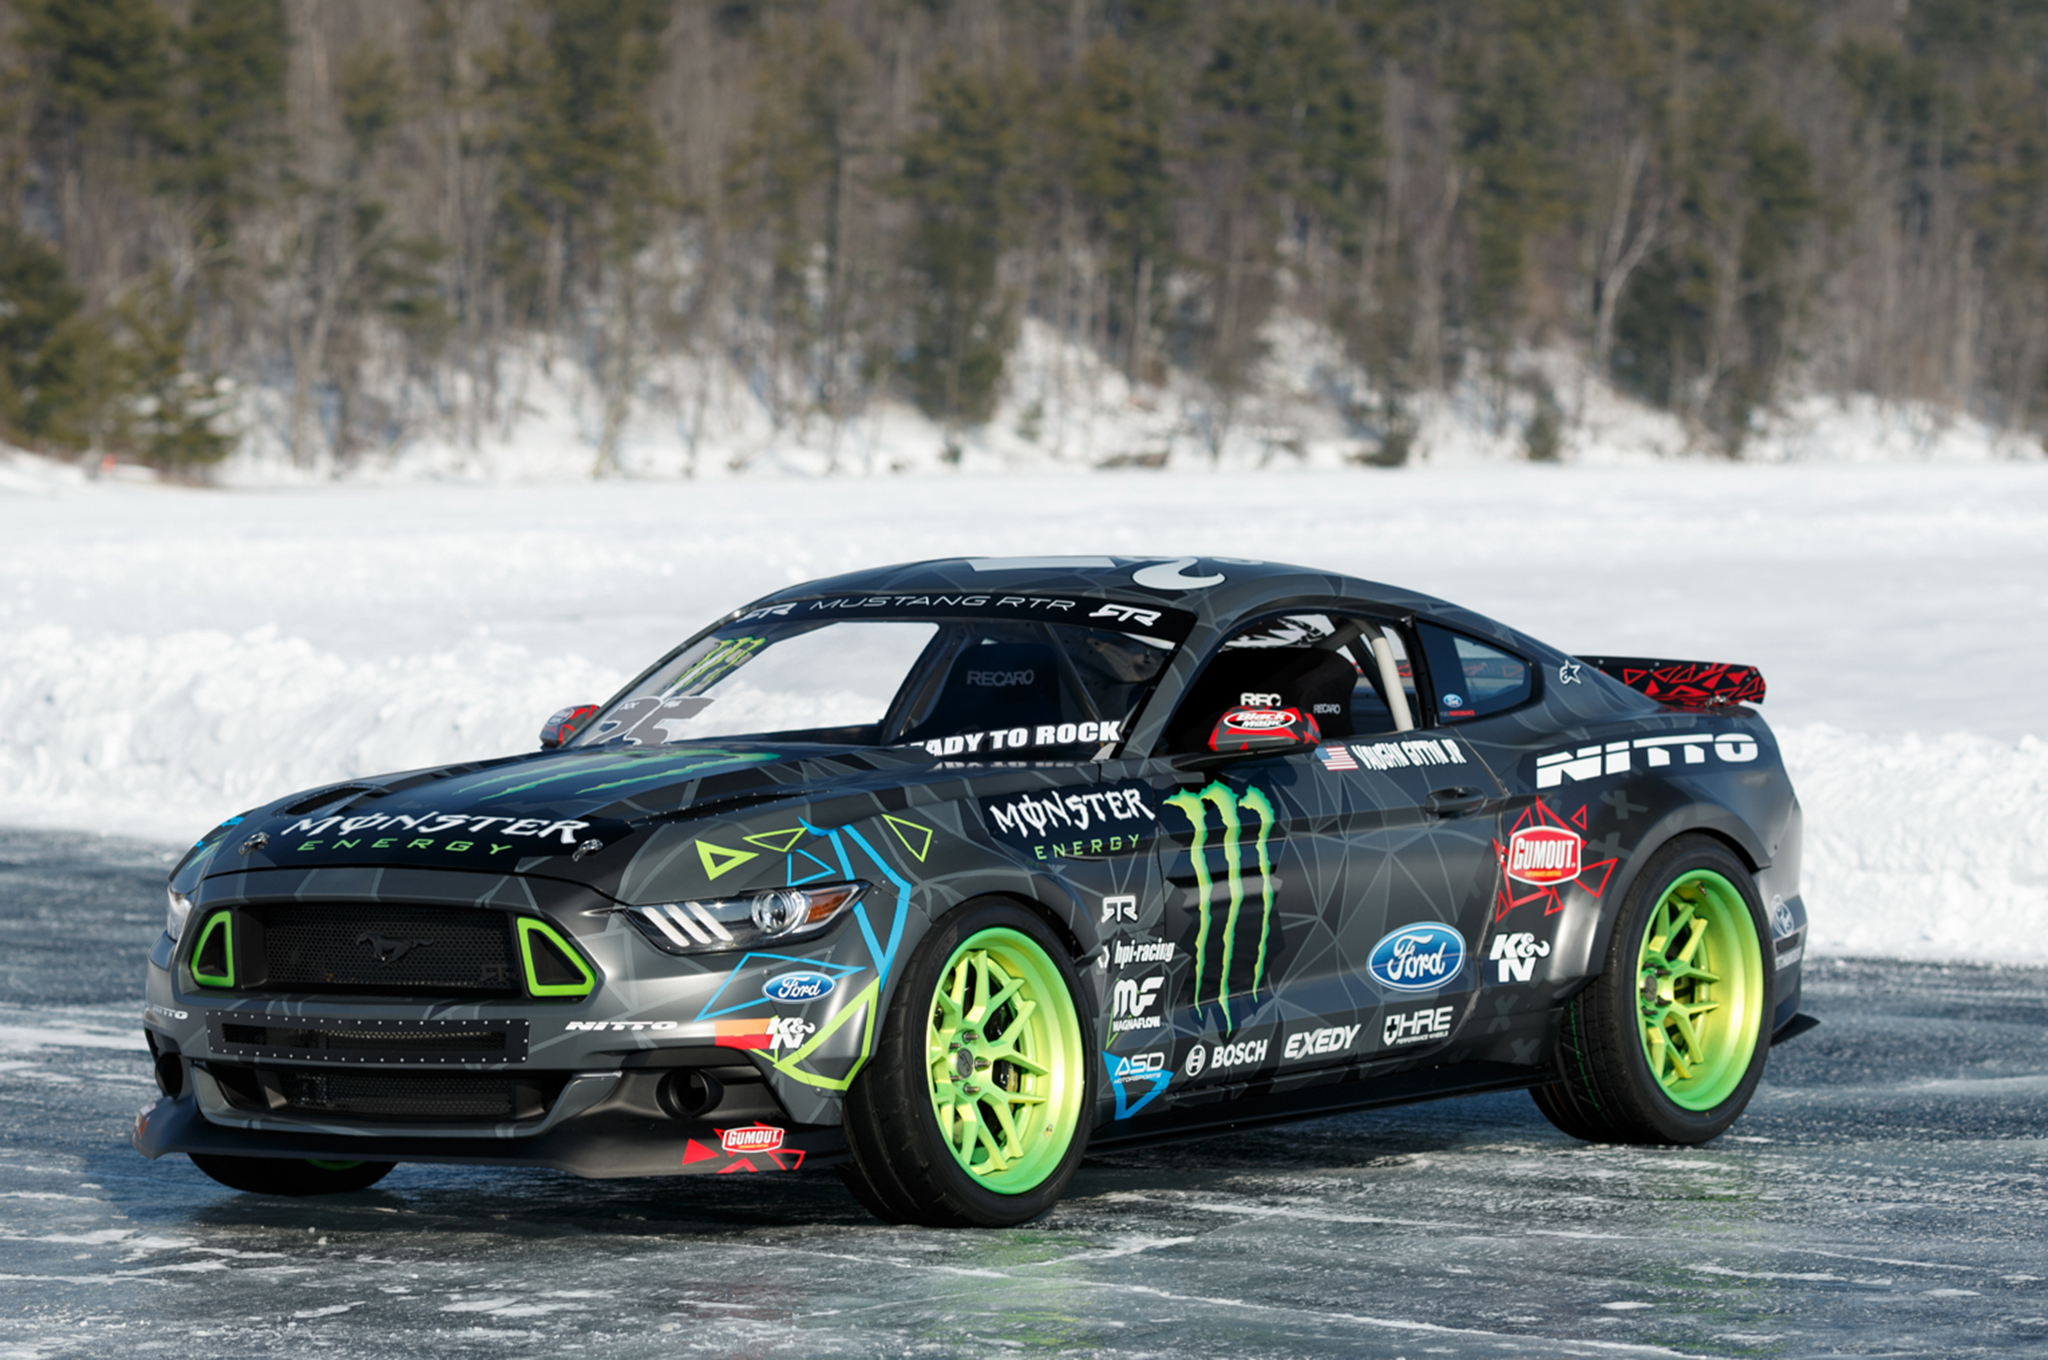 Ford Mustang RTR Backgrounds, Compatible - PC, Mobile, Gadgets| 2048x1360 px